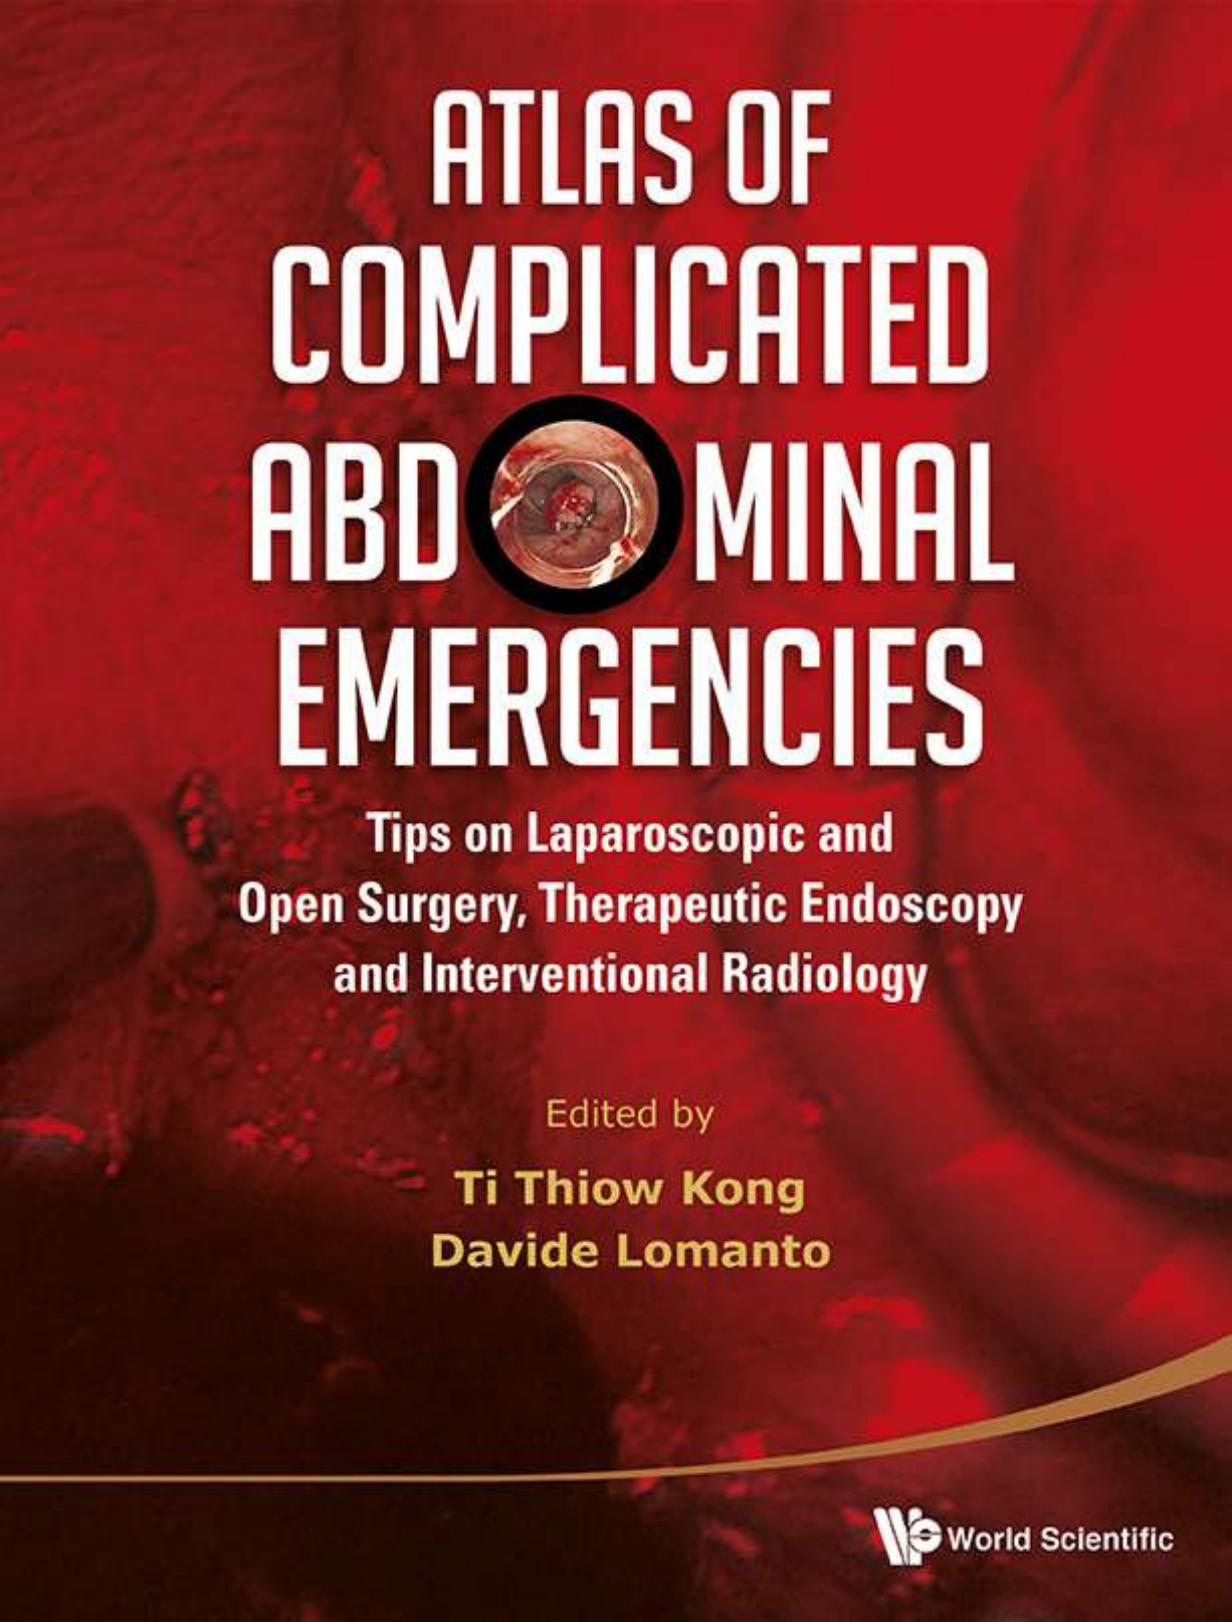 Atlas of Complicated Abdominal Emergencies Tips on Laparoscopic and Open Surgery, Therapeutic Endoscopy and Interventional Radiology Radiotherapy (2014)